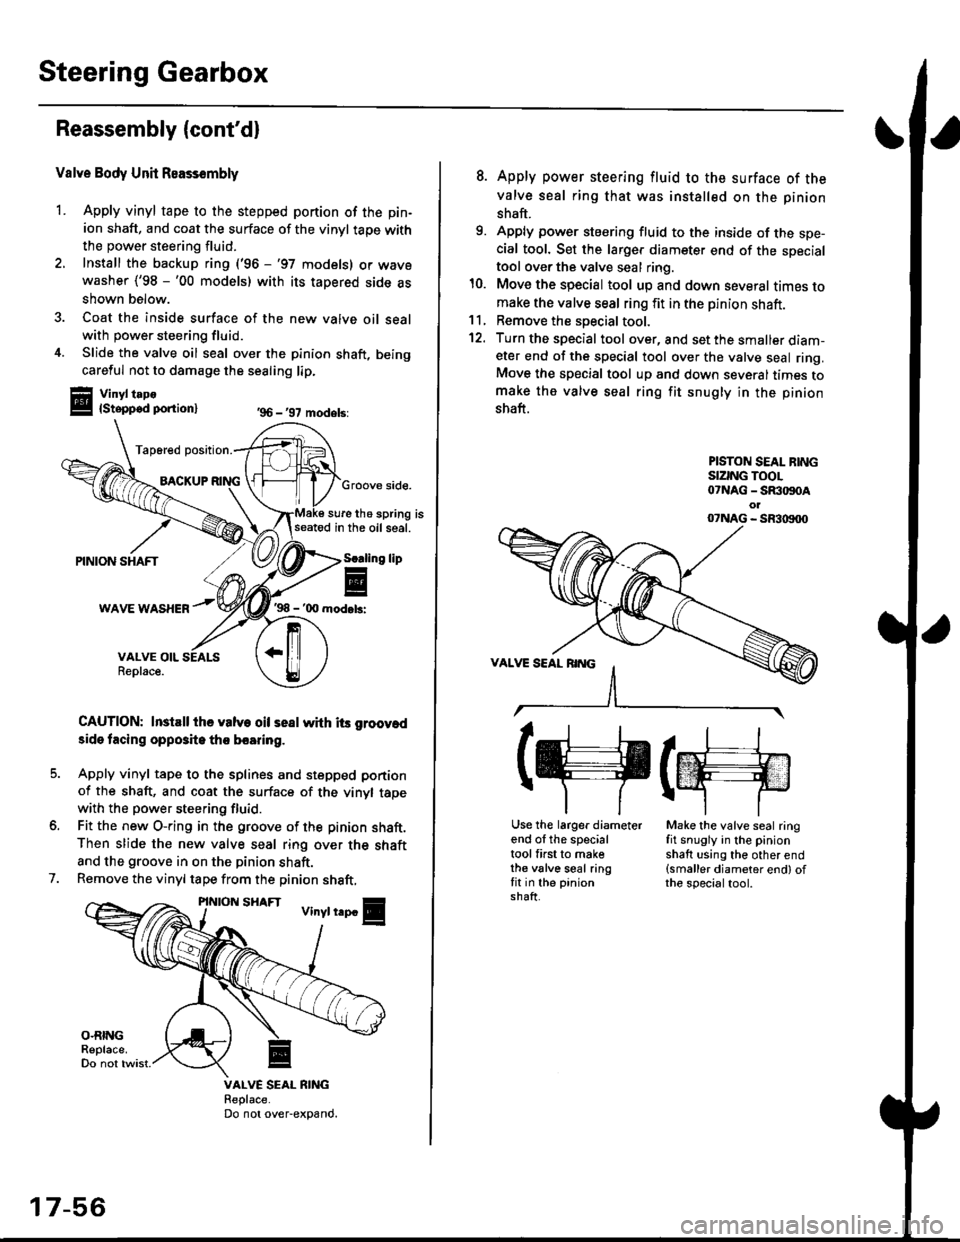 HONDA CIVIC 1998 6.G Owners Guide Steering Gearbox
Reassembly (contd)
Valve Body Unit Reassembly
1. Apply vinyl tape to the stepped portion of the pin-
ion shaft, and coat the surface of the vinyl taoe with
the power steering fluid.
